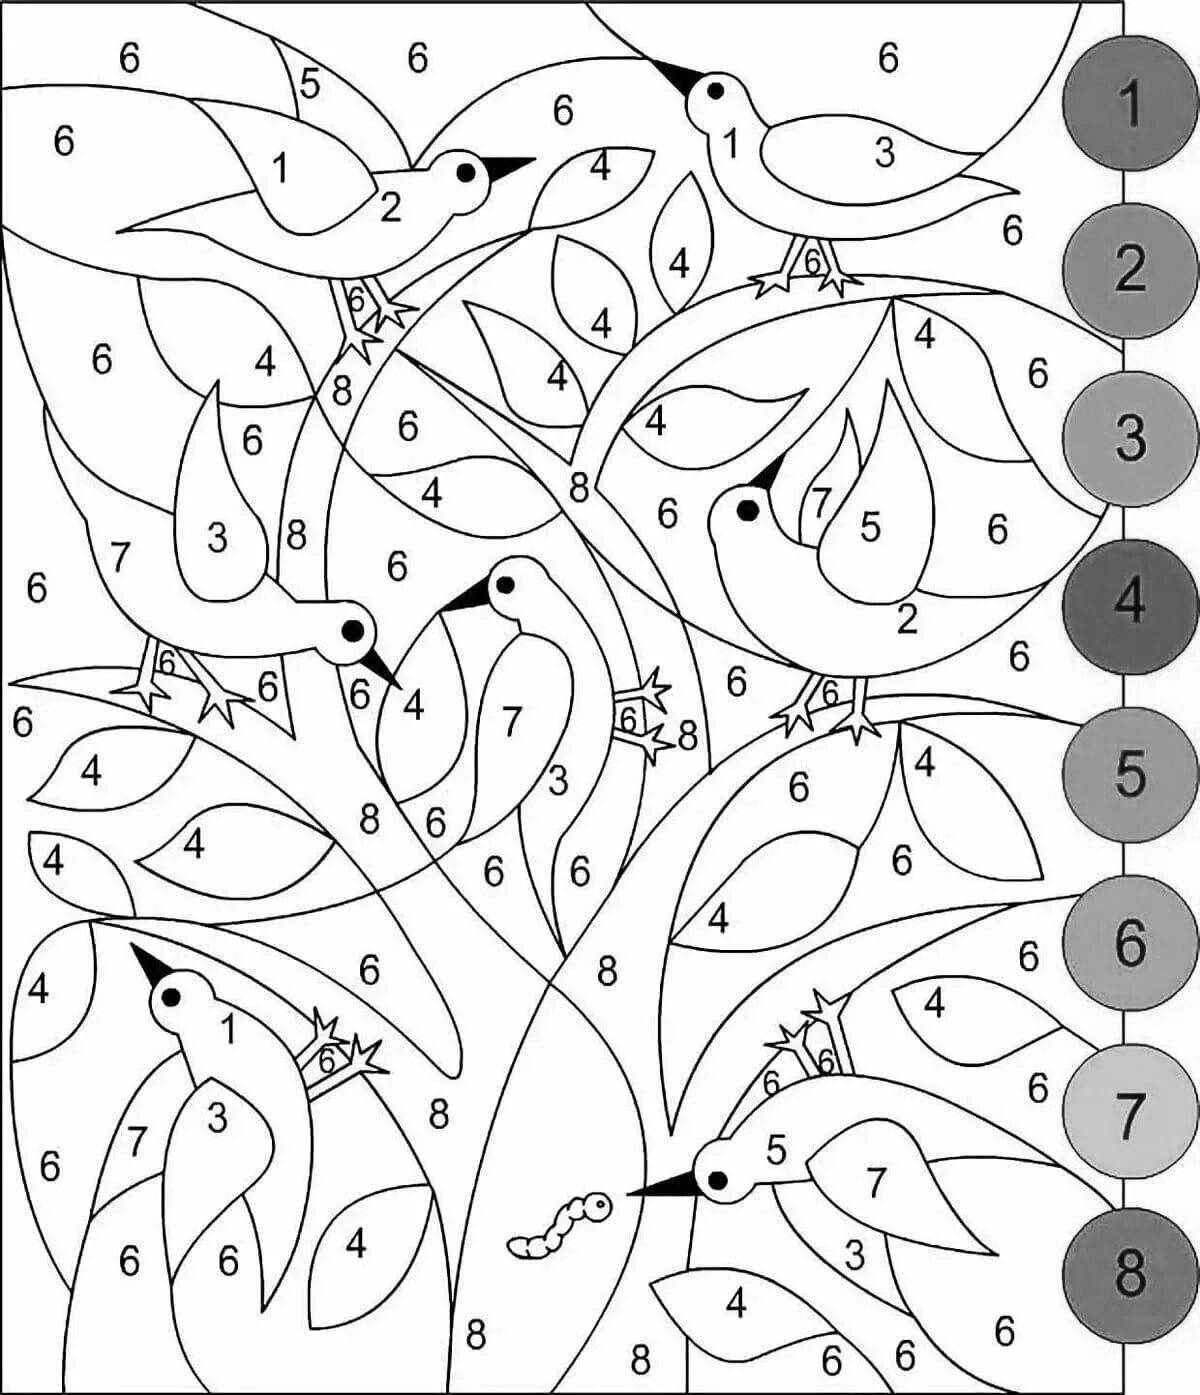 Color-frenzy coloring page digital for children 7 years old